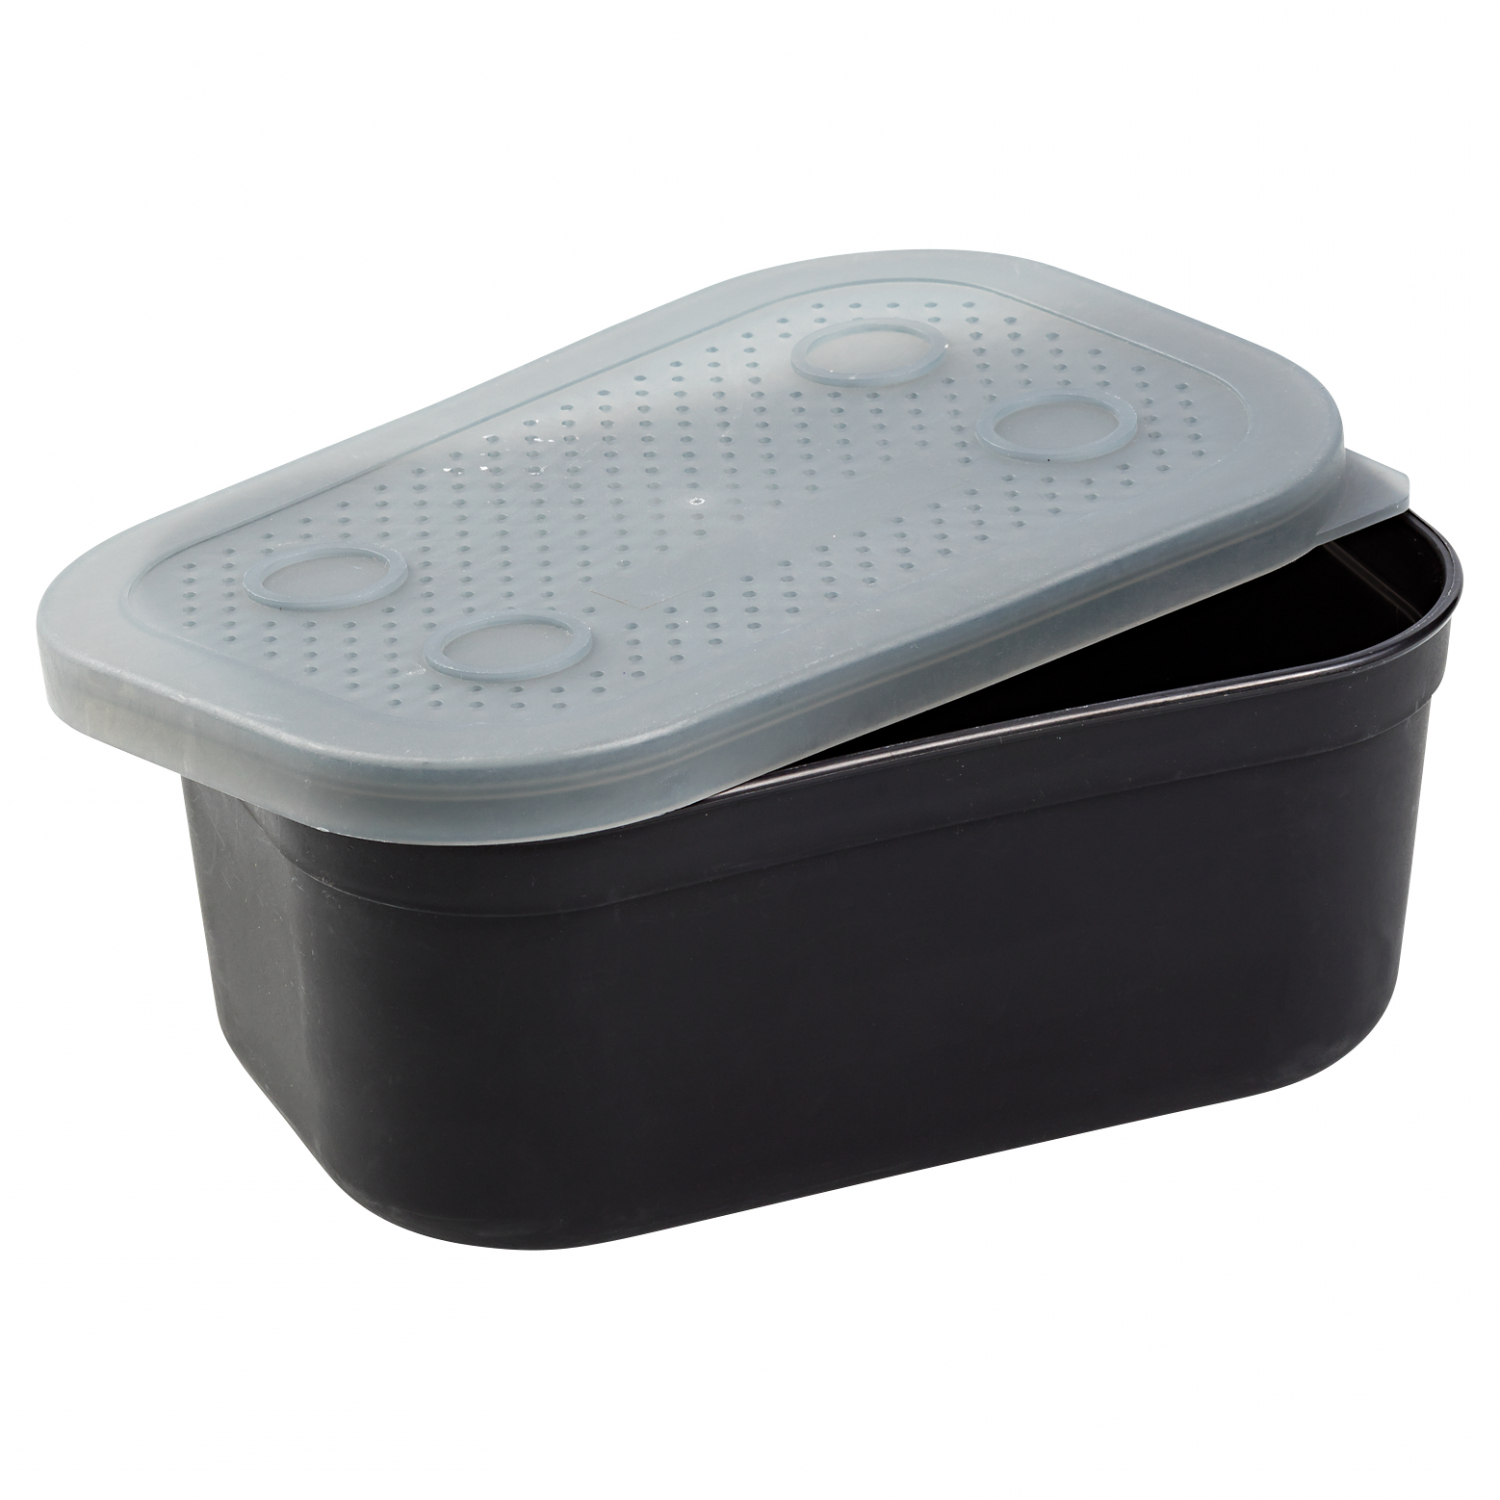 Kogha Bait Box (perforated cover) at low prices